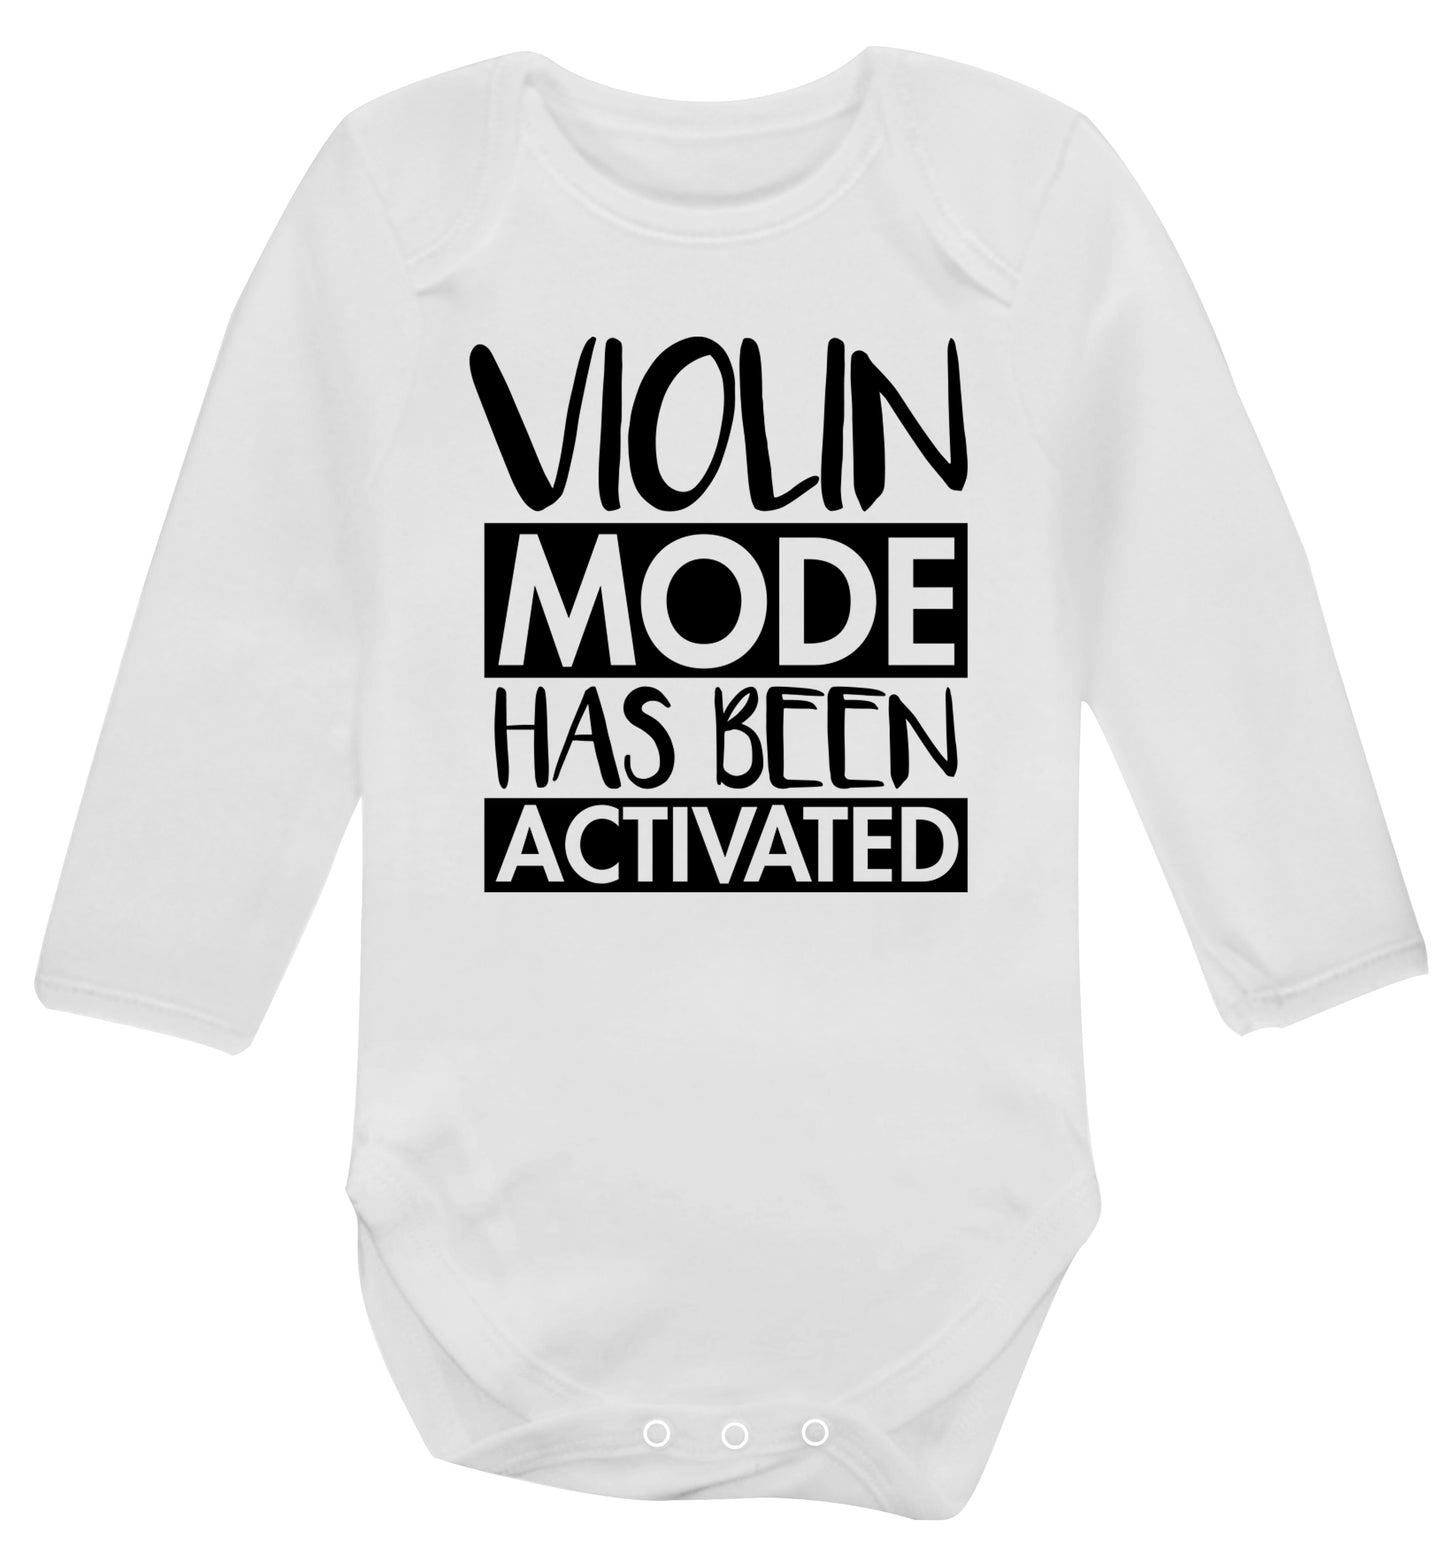 Violin Mode Activated Baby Vest long sleeved white 6-12 months